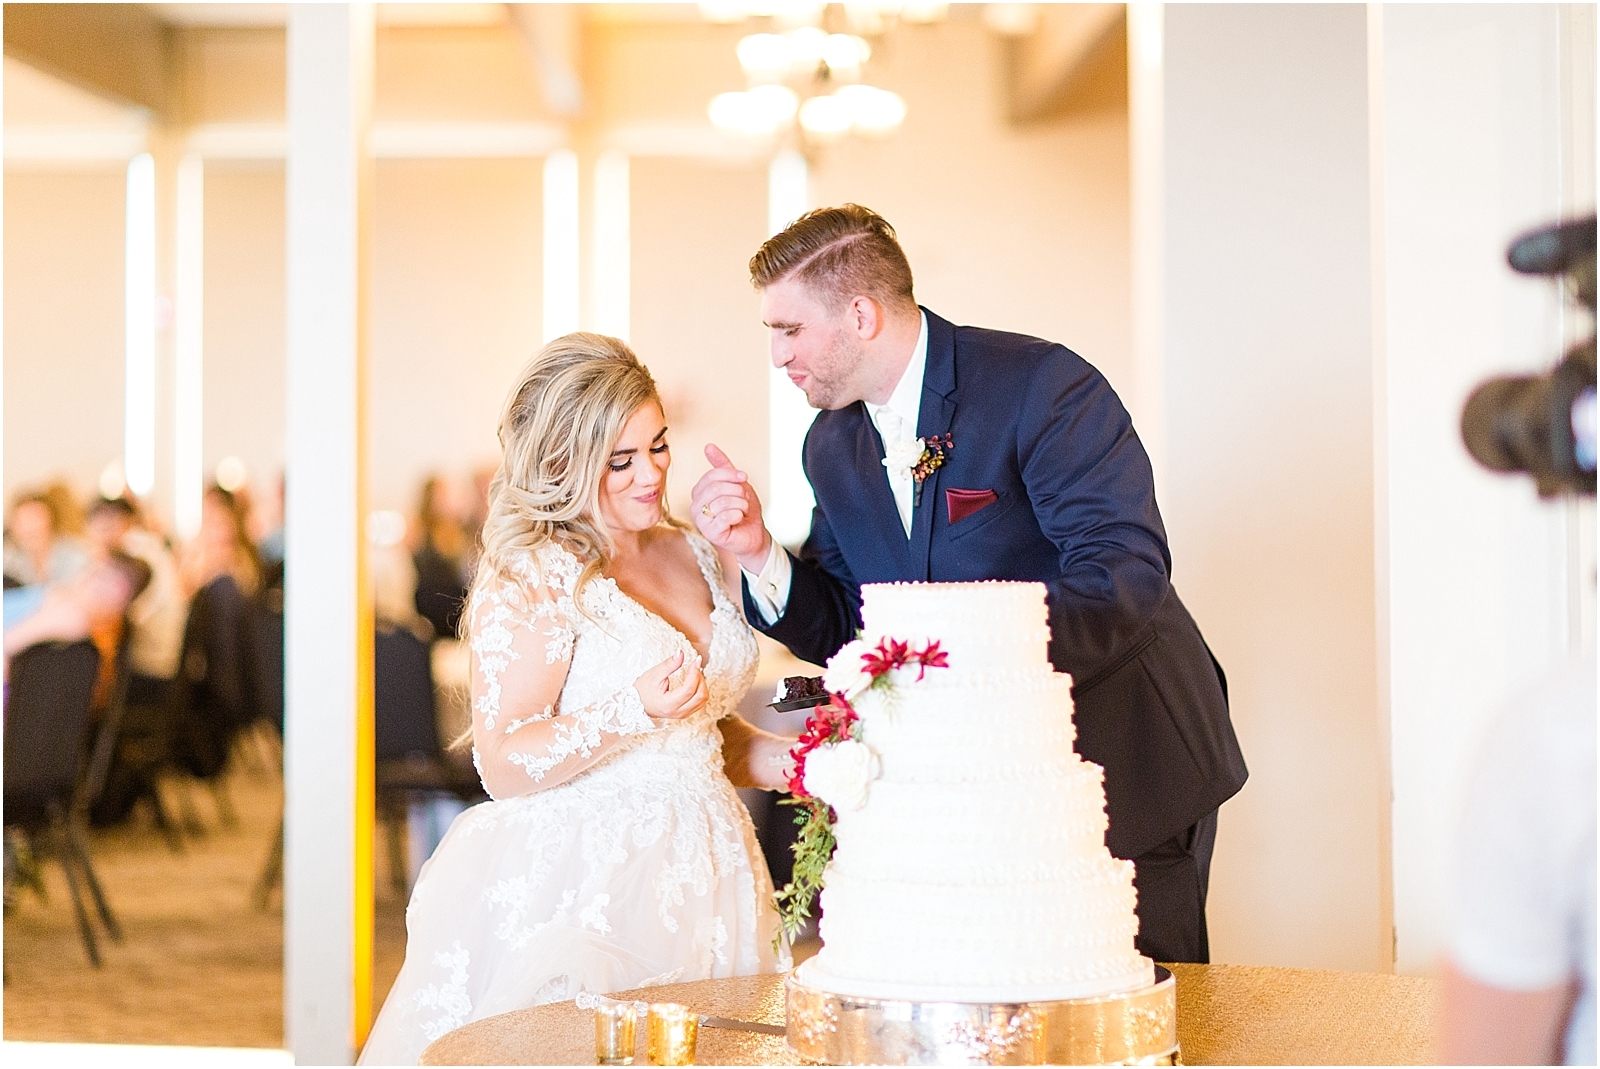 Kayla and Colten | Bret and Brandie Photography0115.jpg